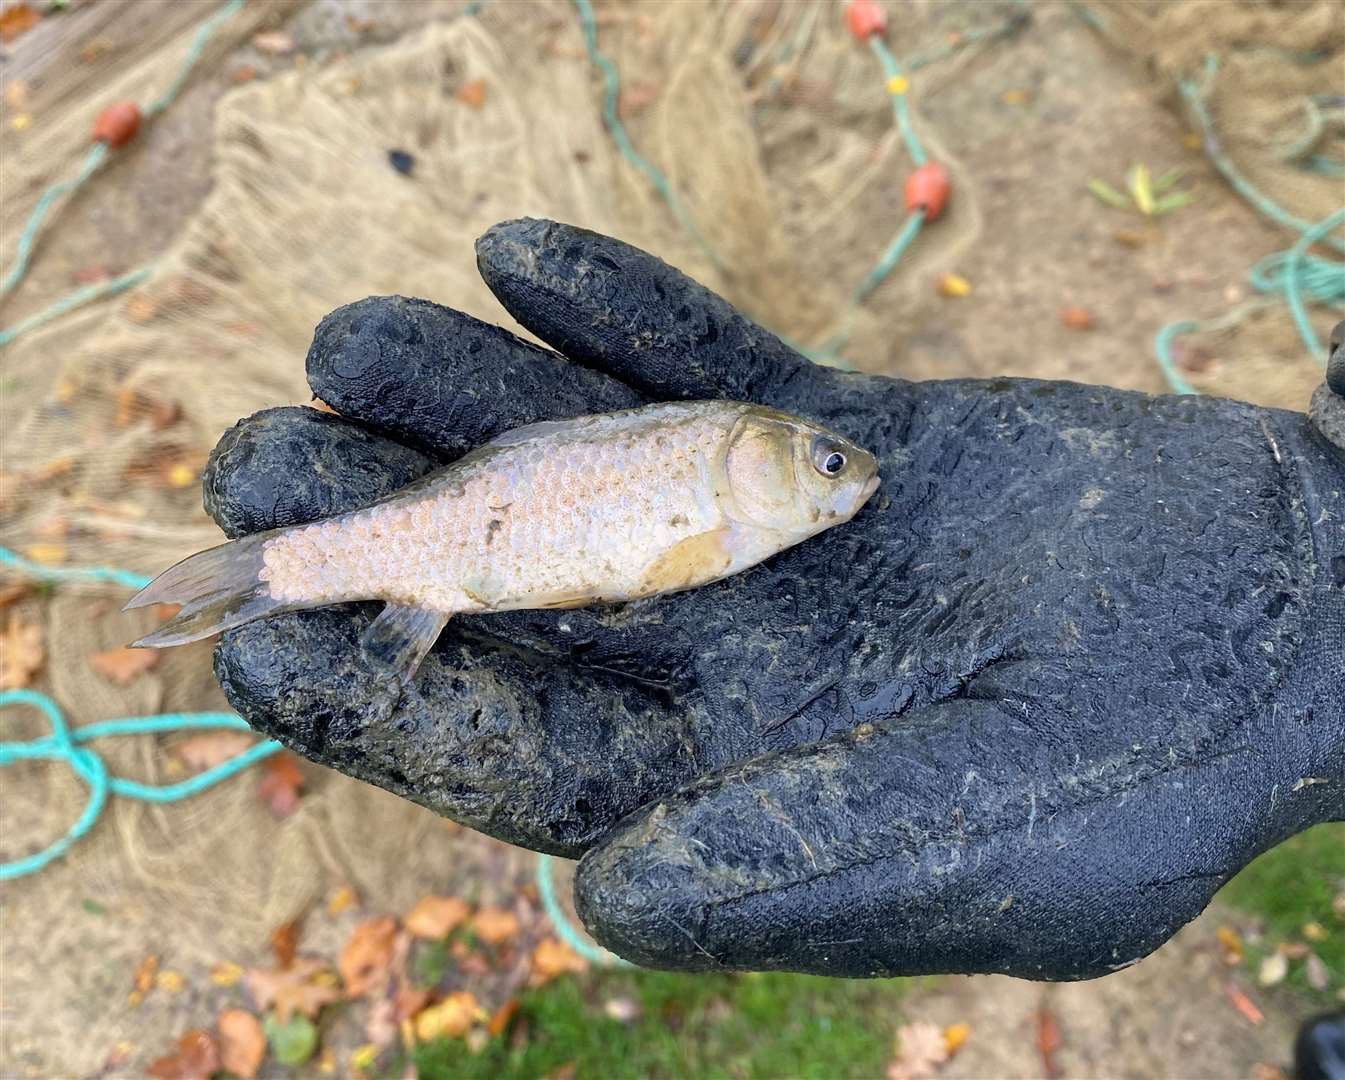 Prussian carp was found in the pond. Picture: Brenchley and Matfield Parish Council